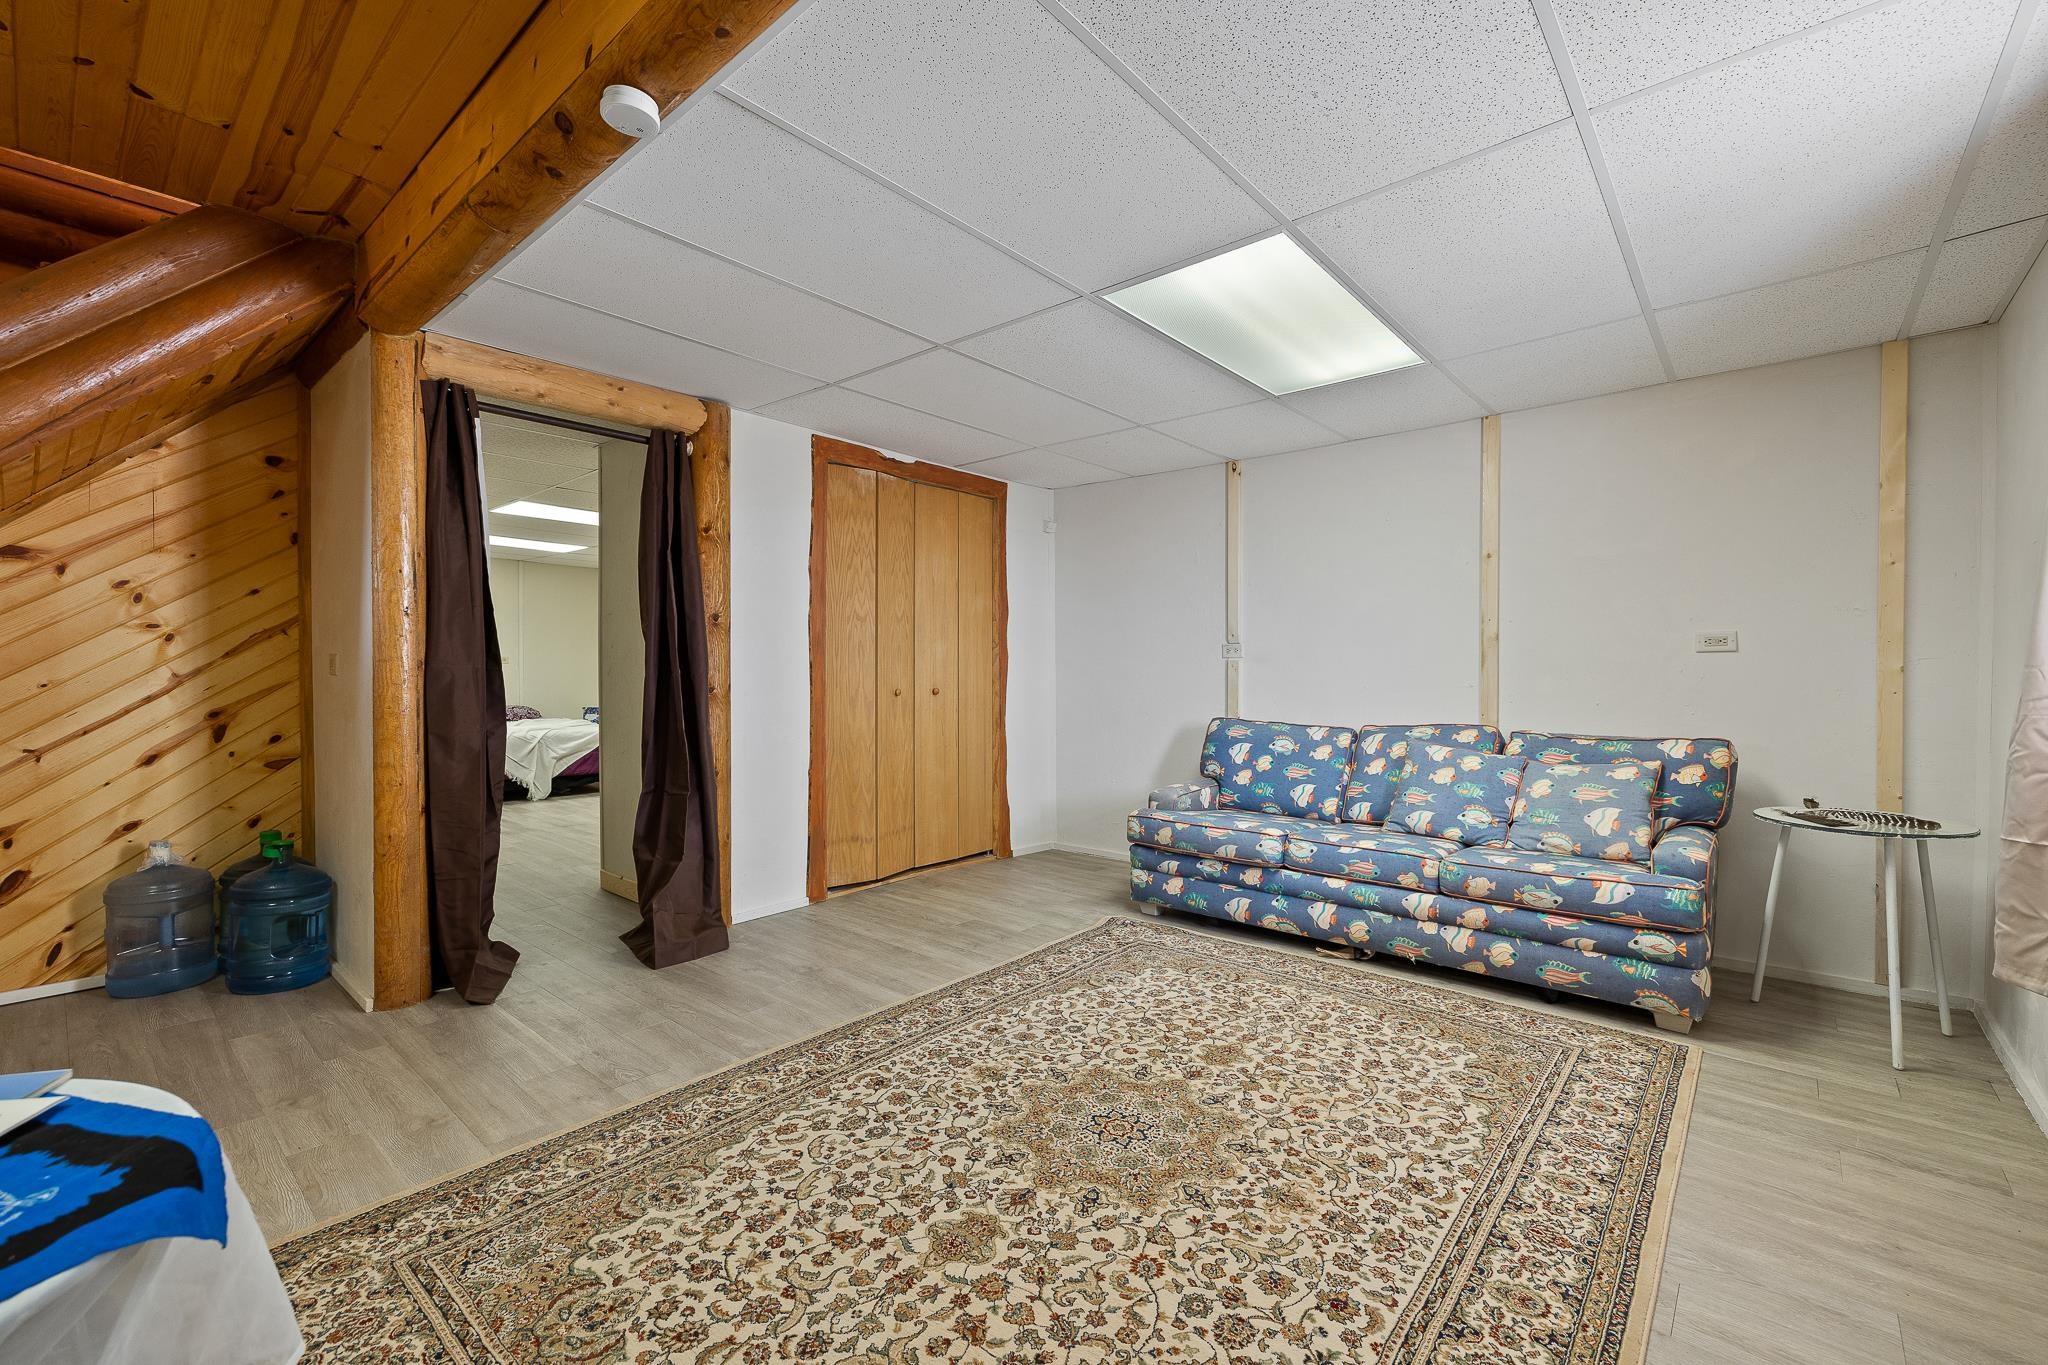 Basement area could be used a separate living suite for family and friends.